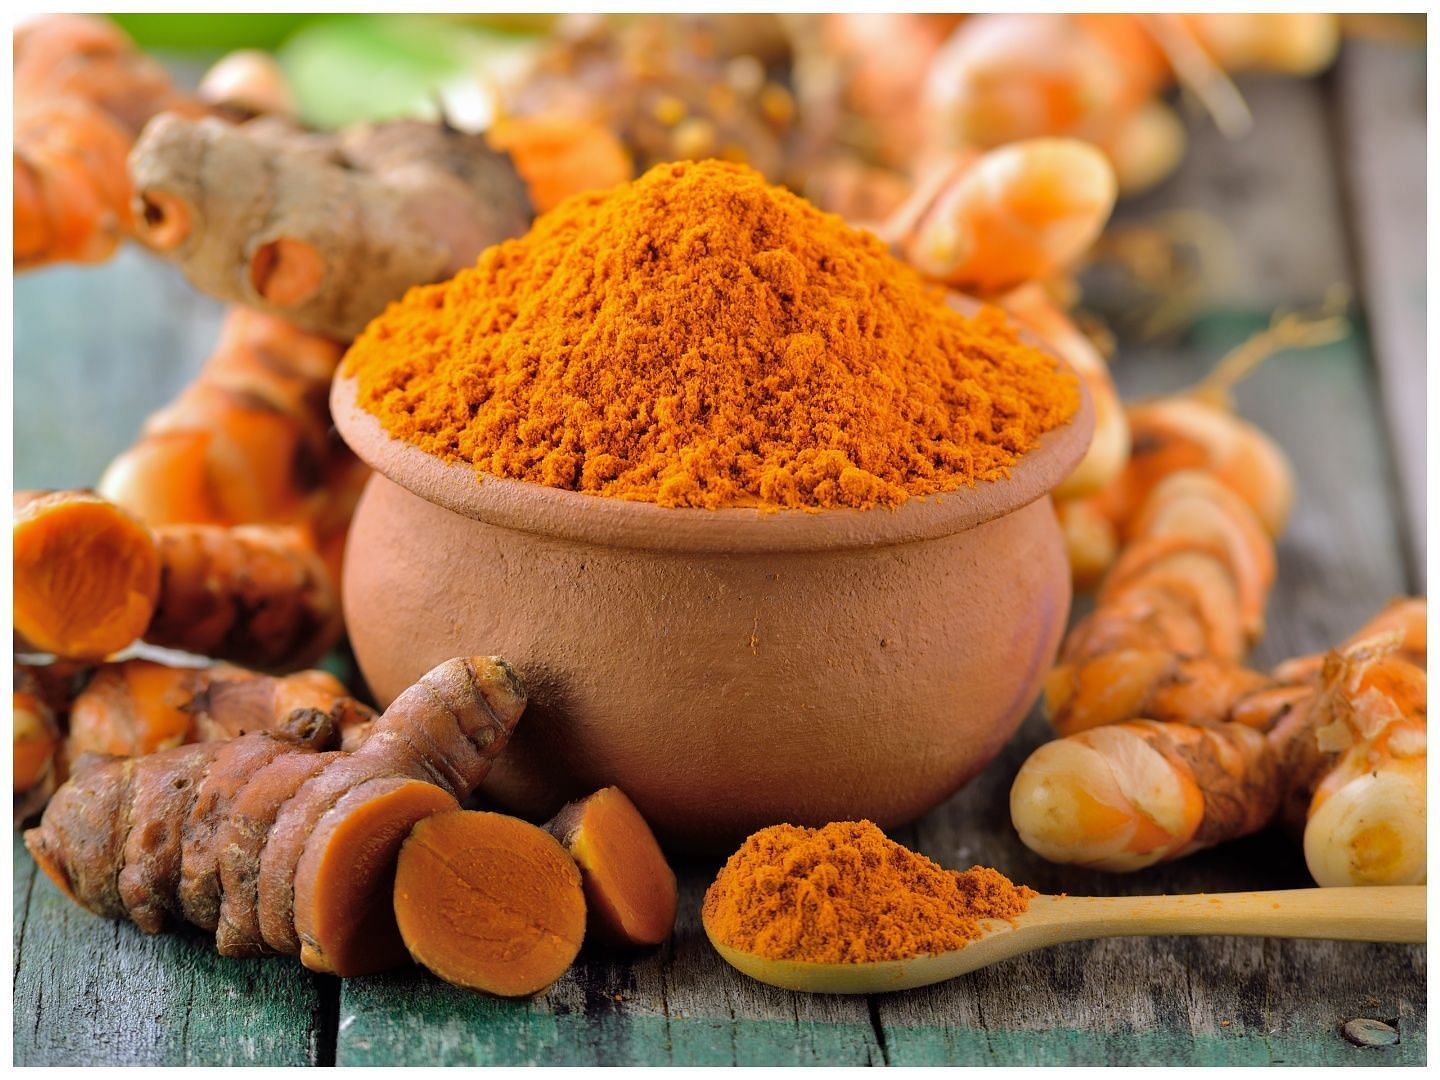 Turmeric fights acne on your skin (Image via Vecteezy)